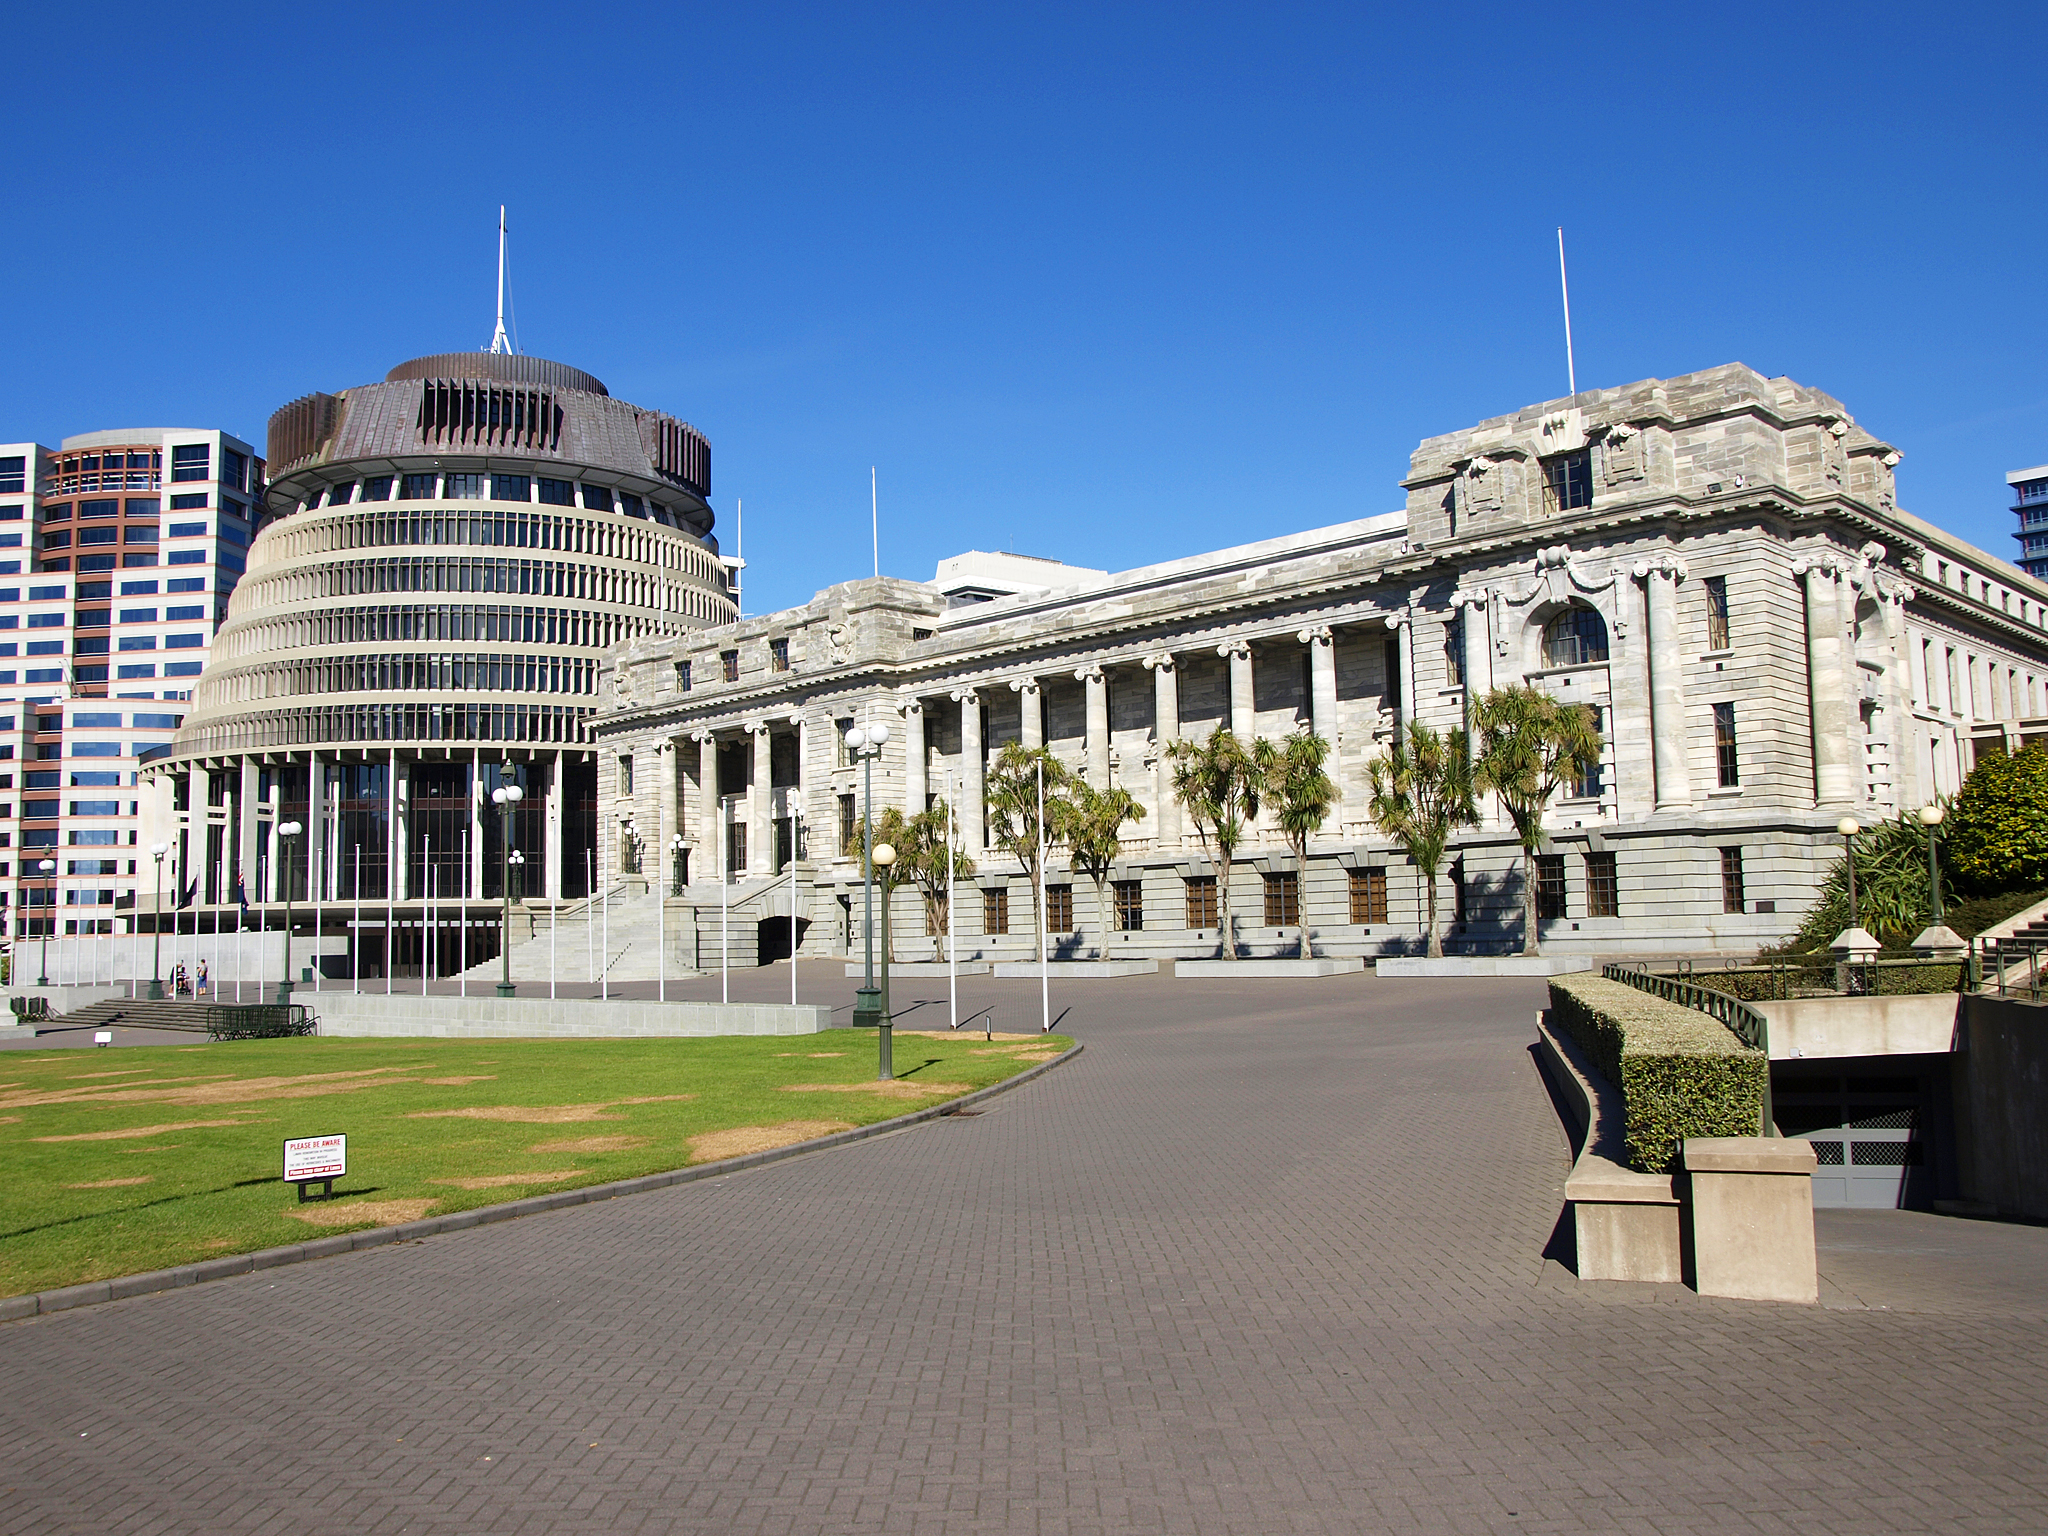 New Zealand to lift almost all COVID-19 restrictions